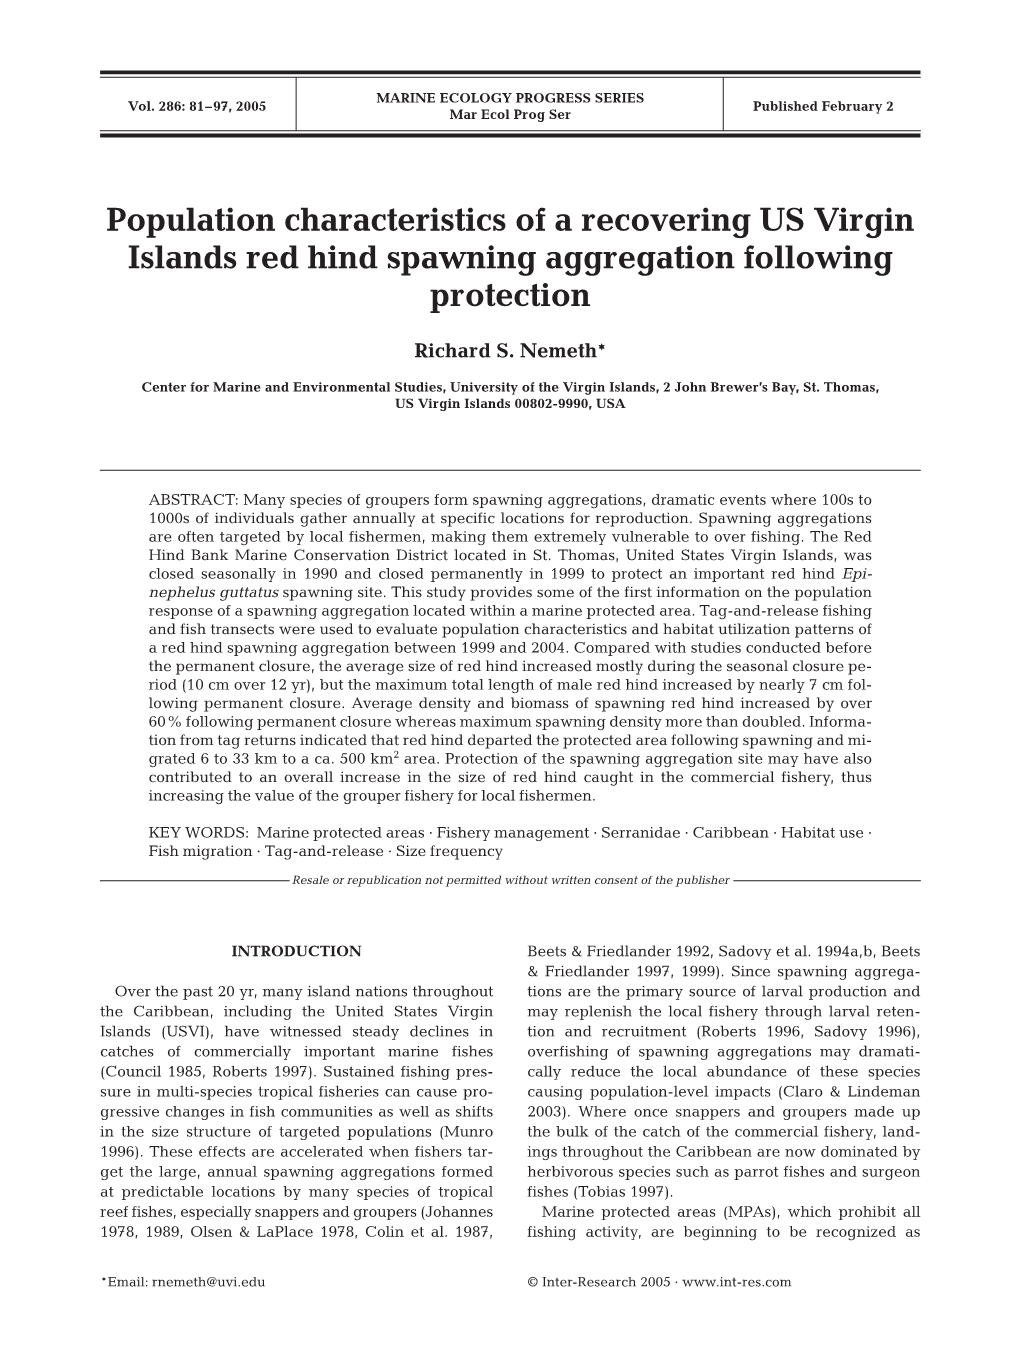 Population Characteristics of a Recovering US Virgin Islands Red Hind Spawning Aggregation Following Protection